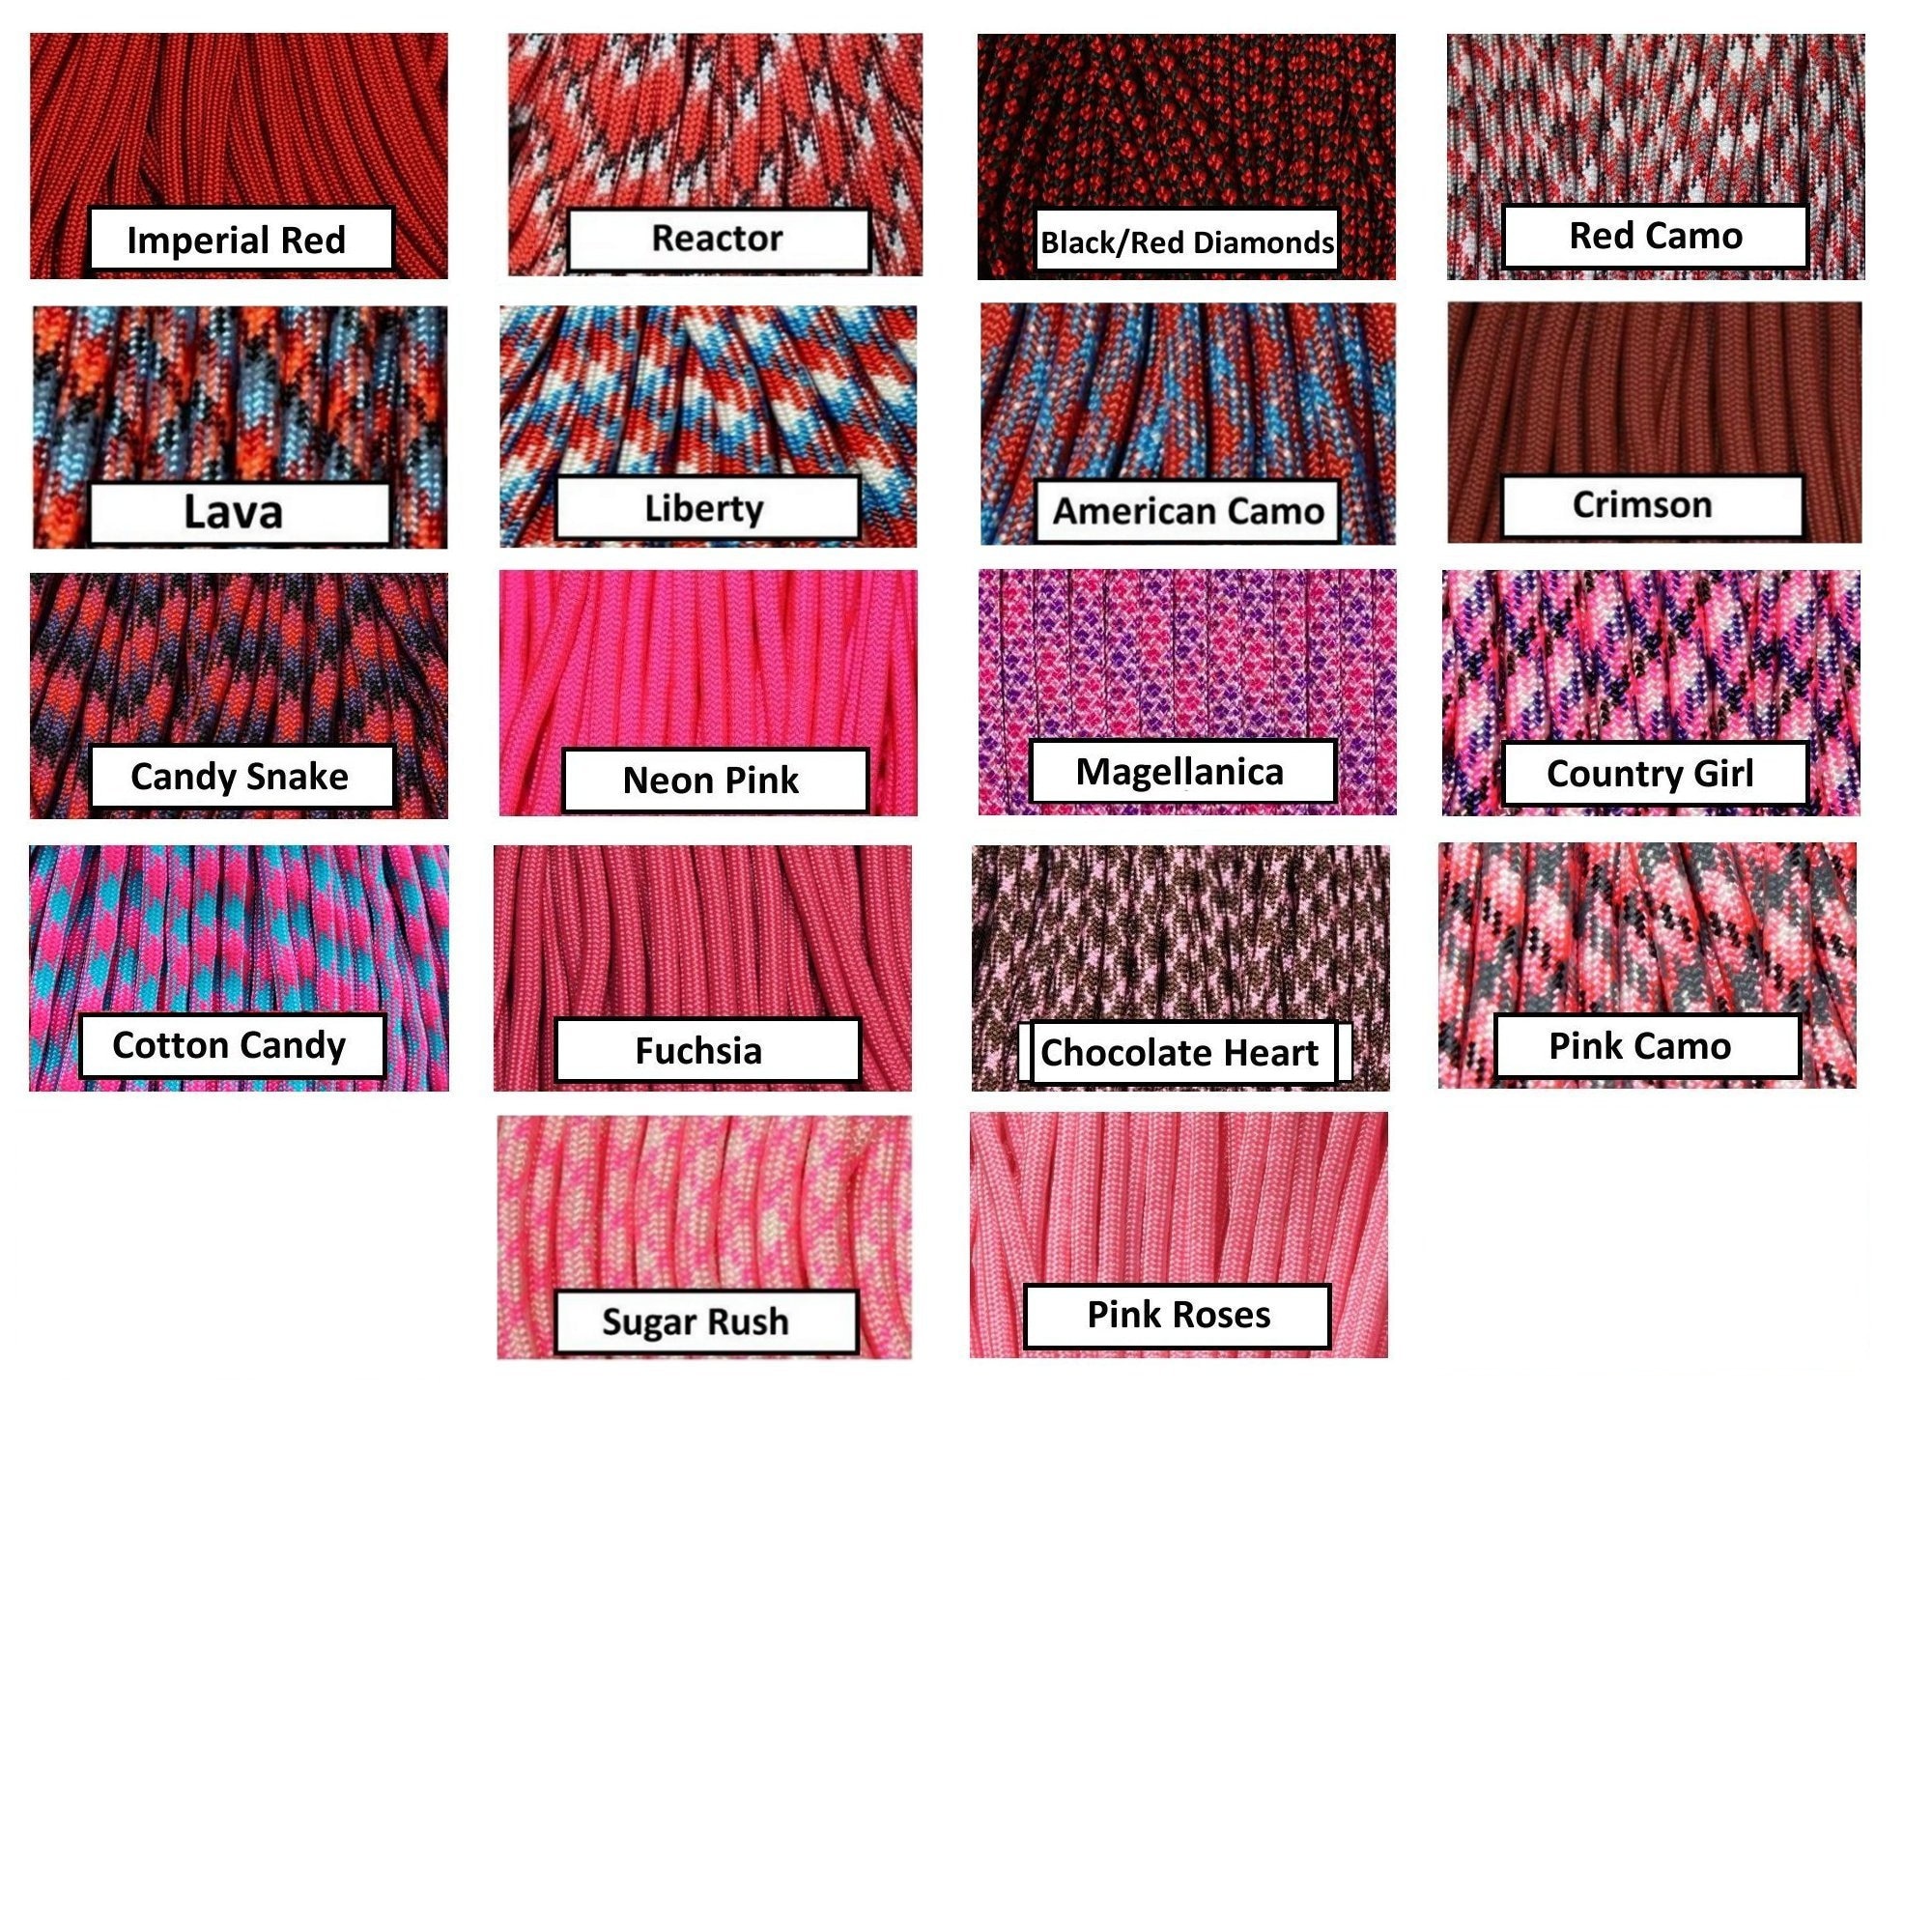 550 Paracord 10', 25', 50' or Sample Pack 100 Colors to Choose From 